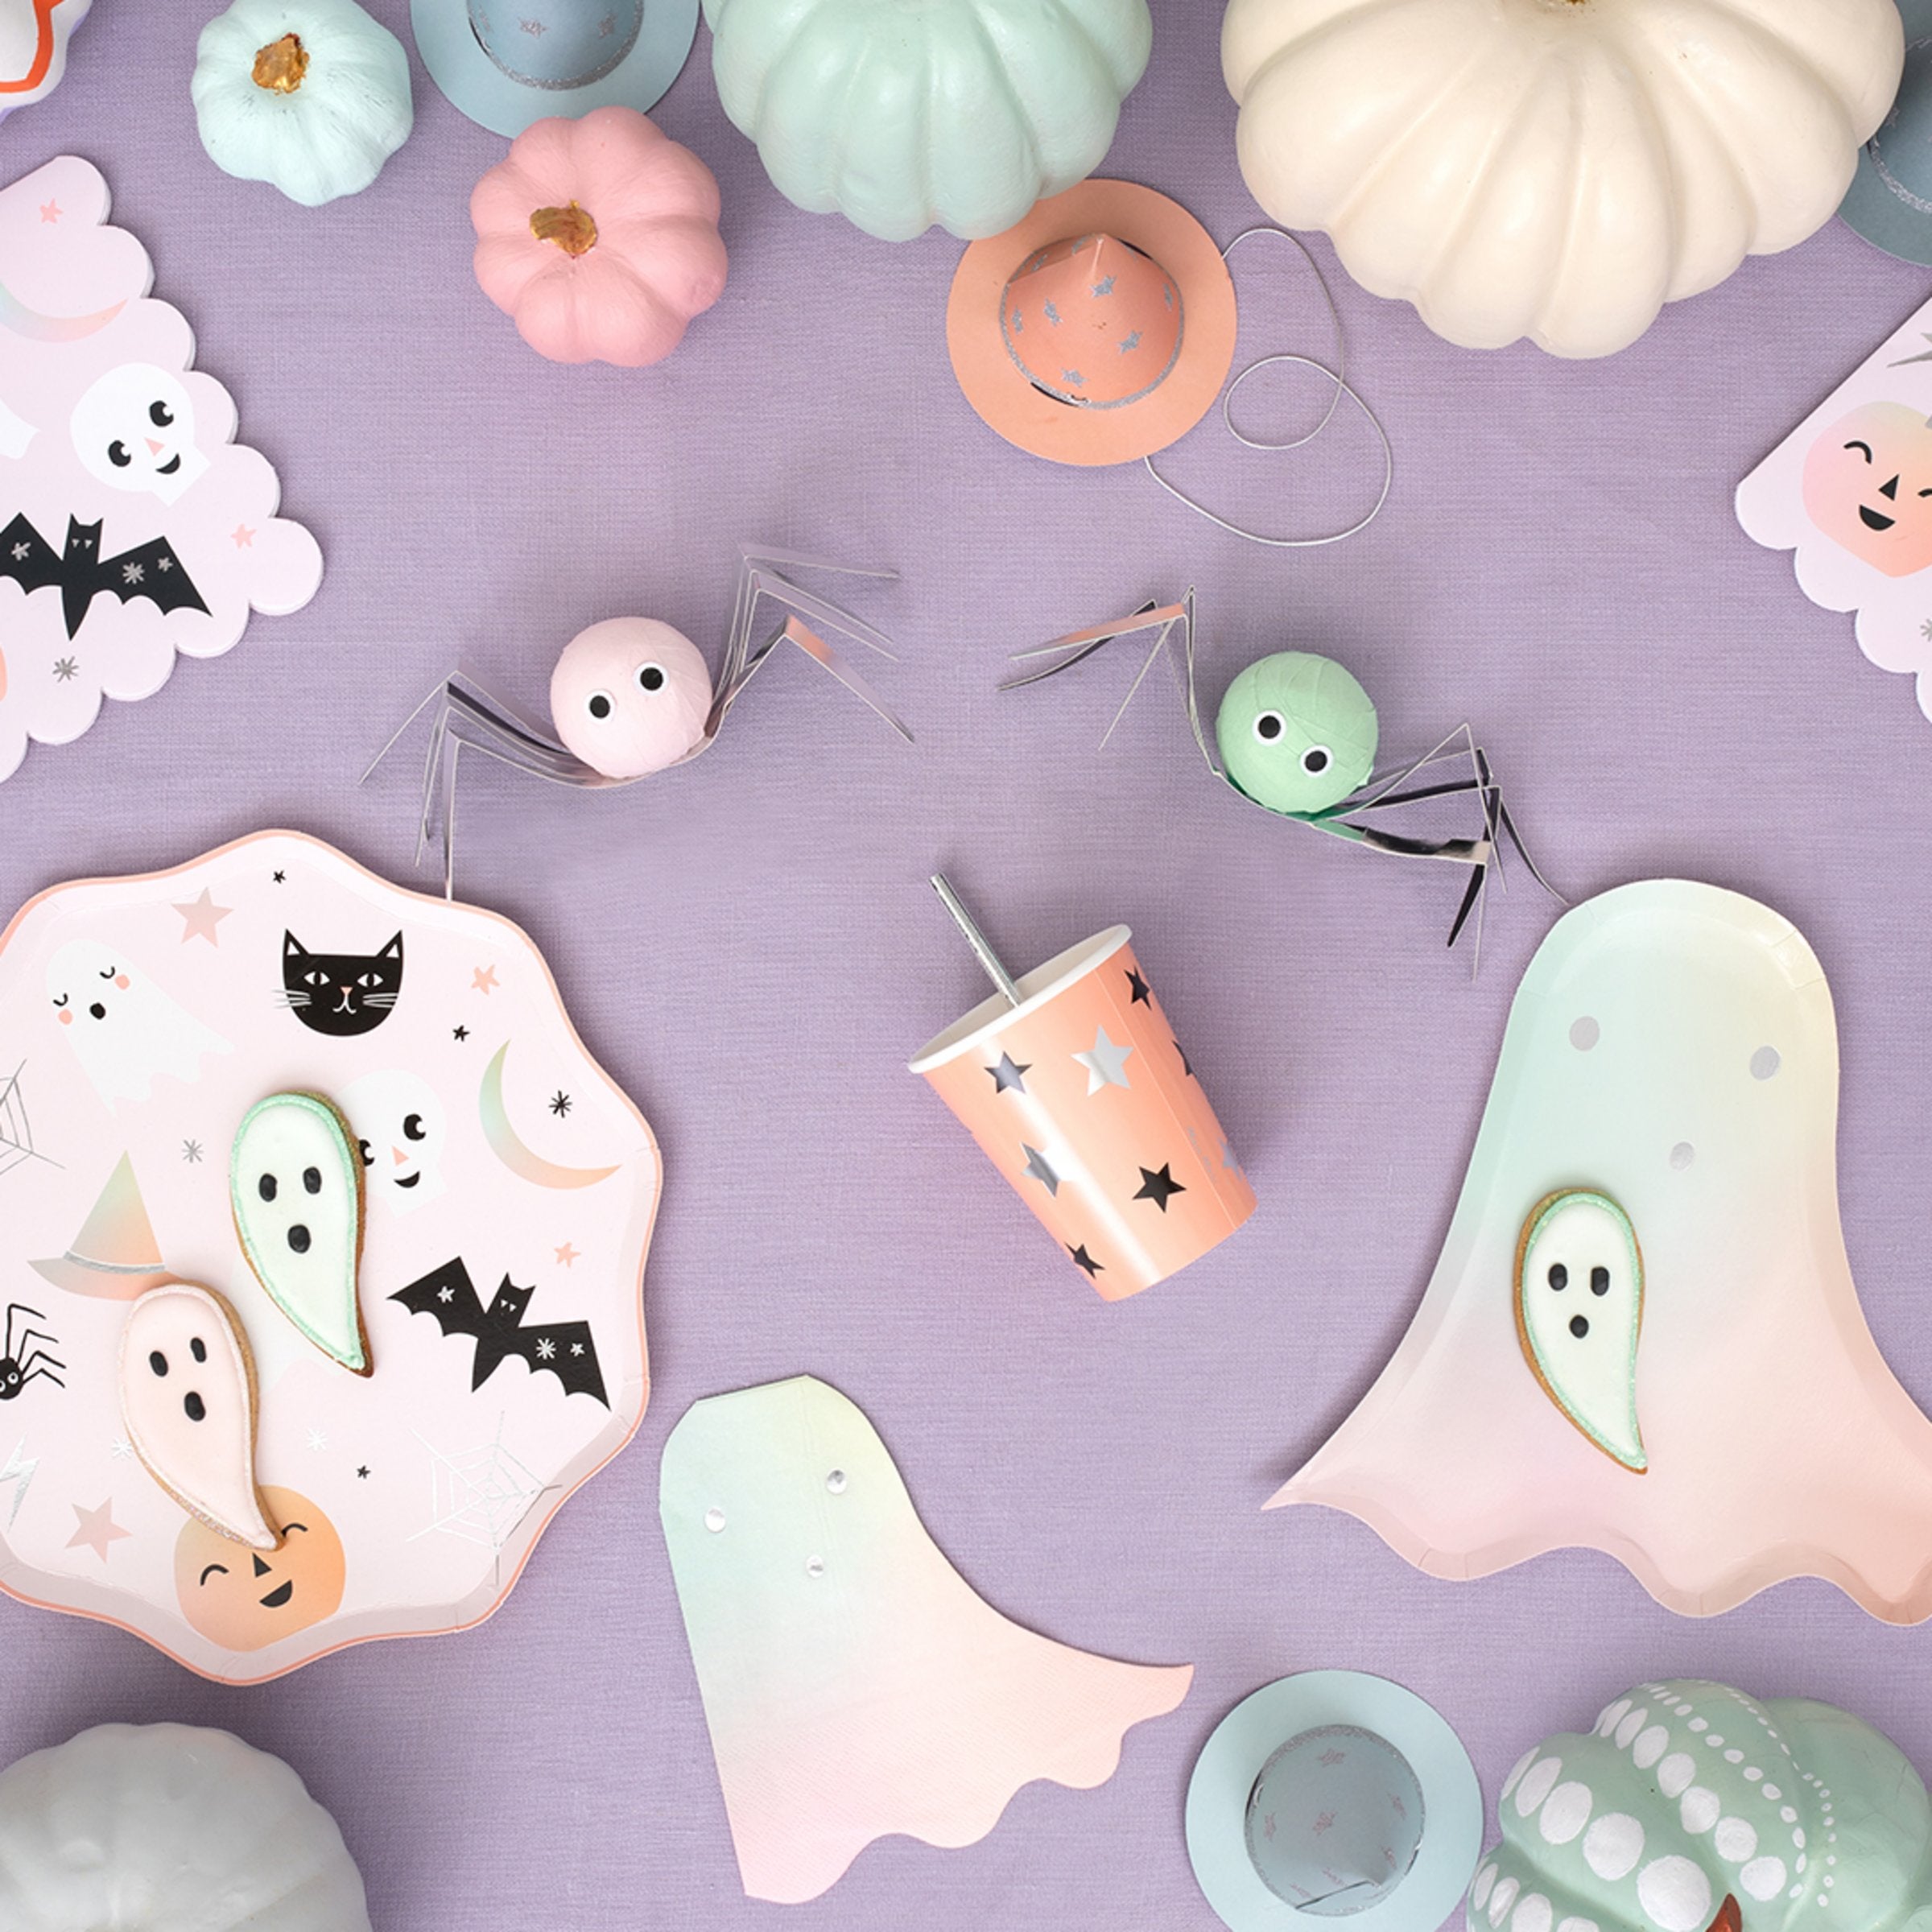 Make terrific Halloween cookies with this stainless steel set of 6 shapes.